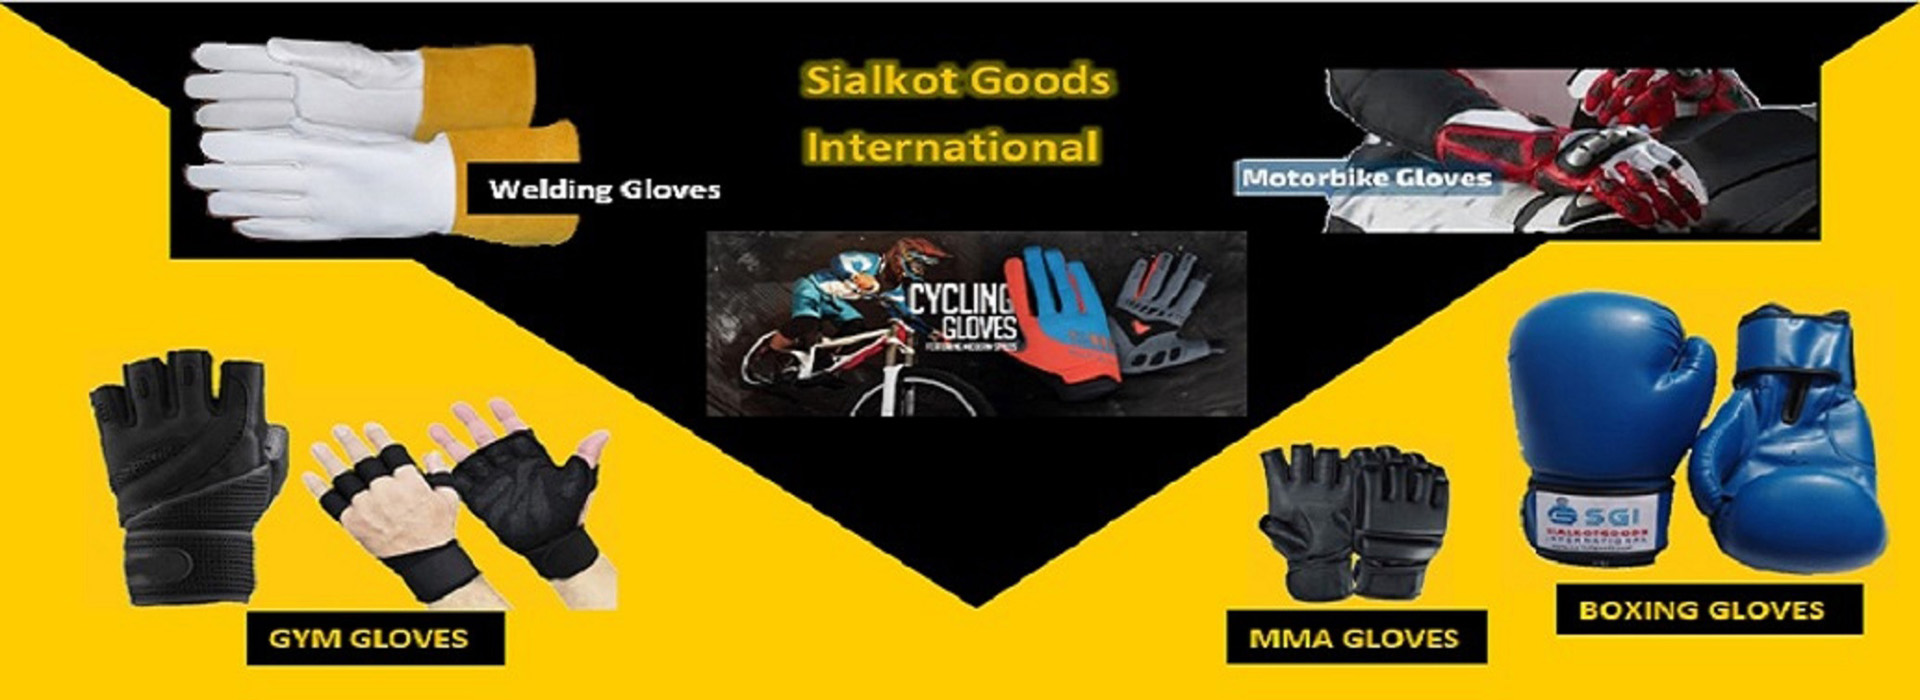 All types of Gloves